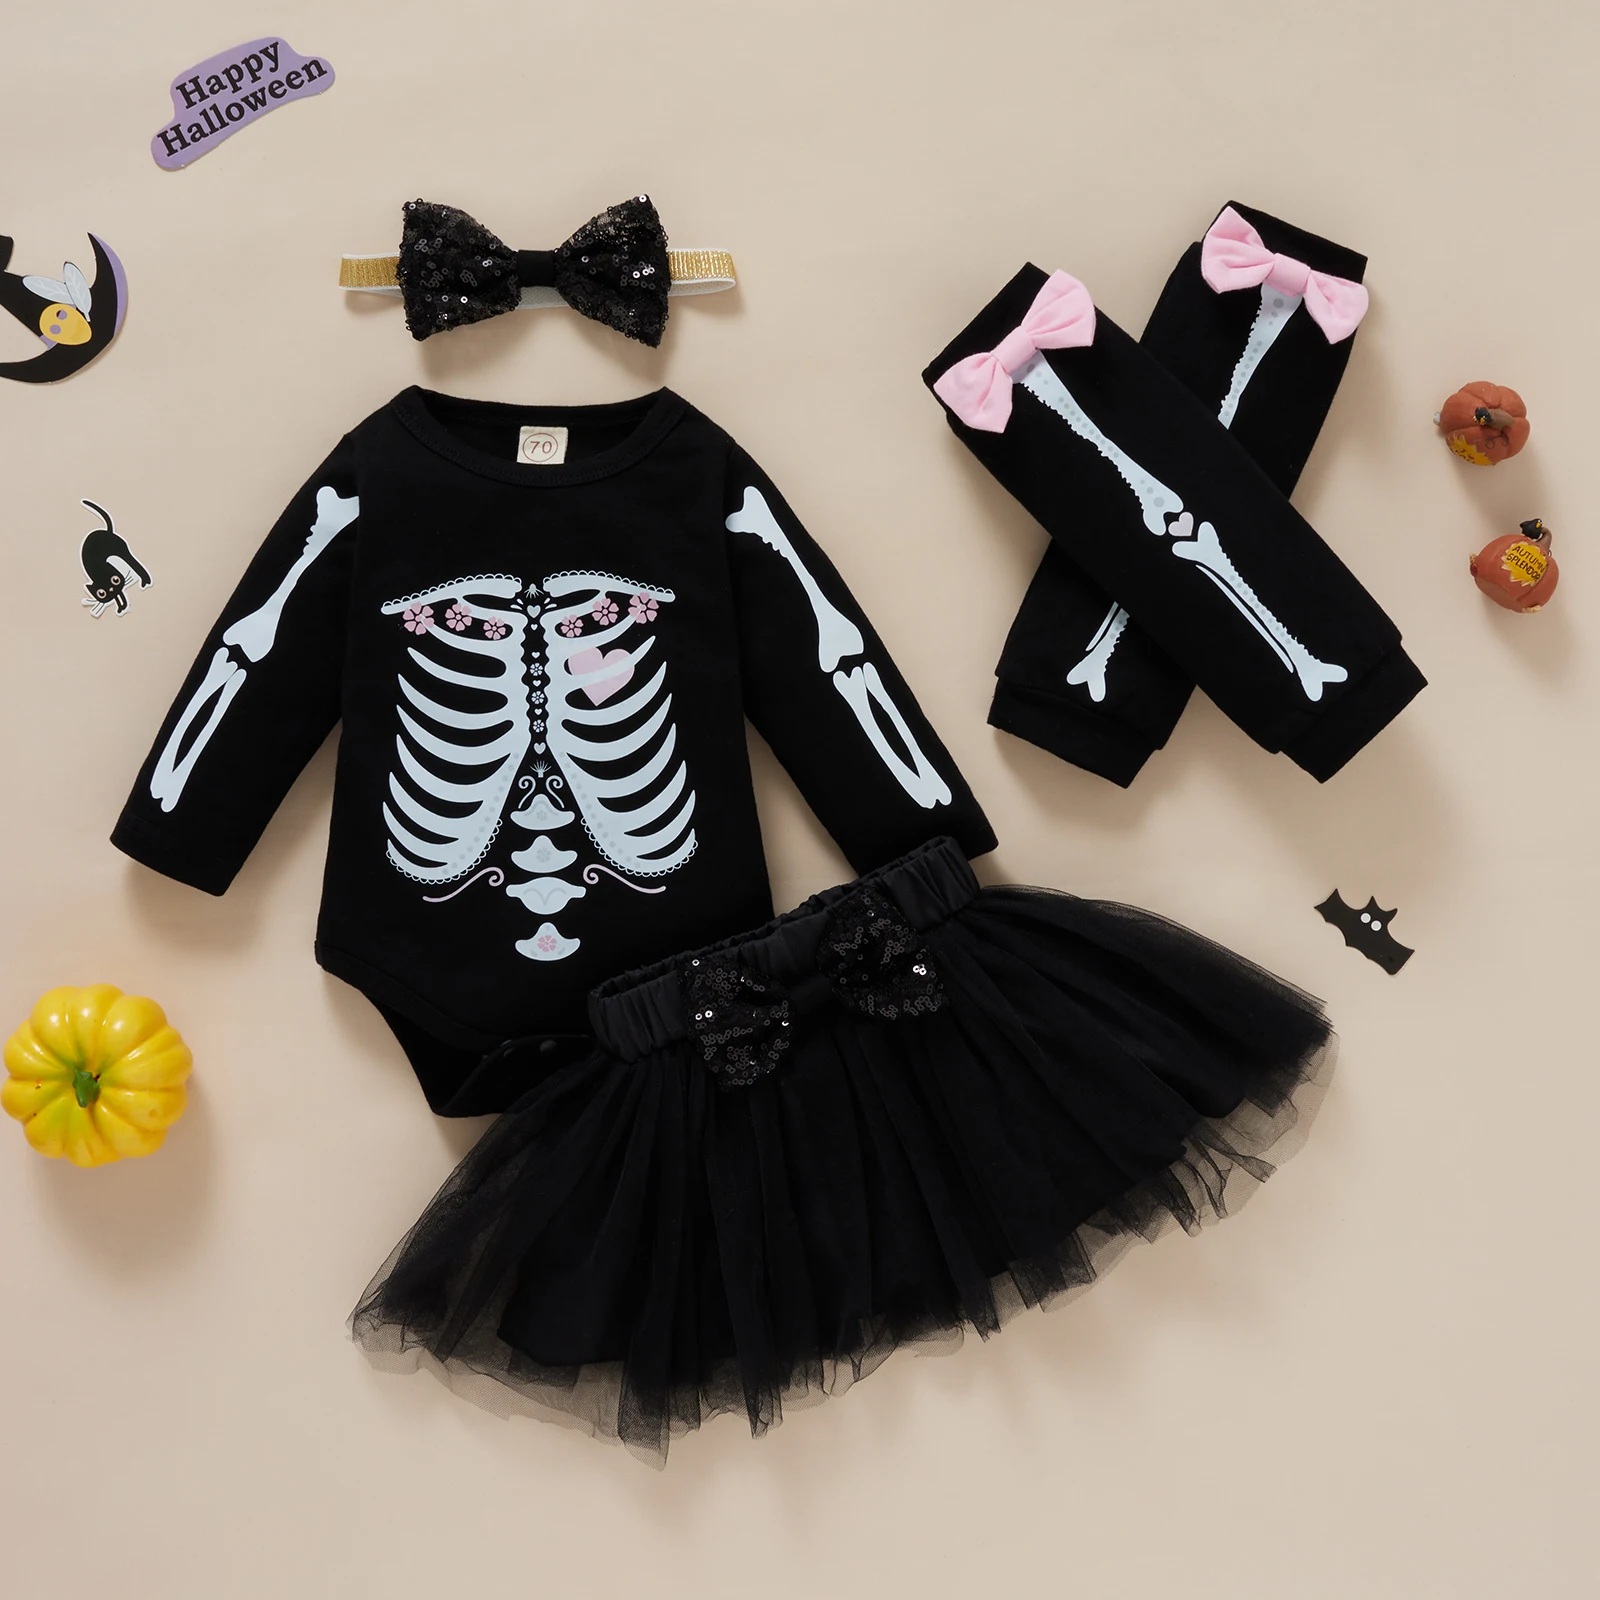 4pcs Baby Girls Halloween Clothes Set Fashion Skeleton Bow Knot Printed Pattern Romper Skirt Foot Cover and Headdress Outfits baby clothes penguin set